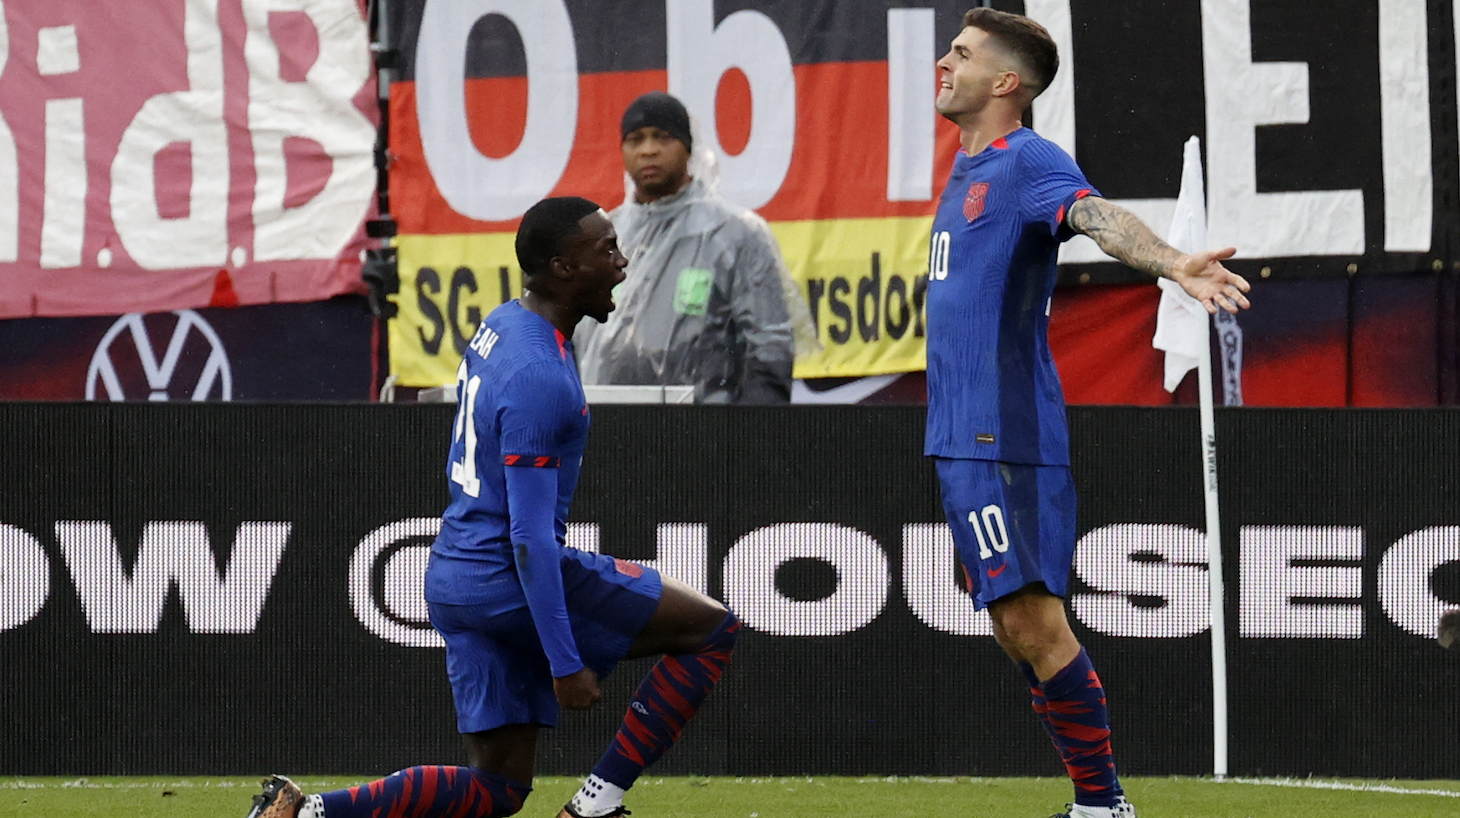 United States forward Christian Pulisic (10) celebrates his goal with United States forward Tim Weah (21) during a match between the United Sates and Germany on October 14, 2023, at Pratt &amp; Whitney Stadium in East Hartford, Connecticut.